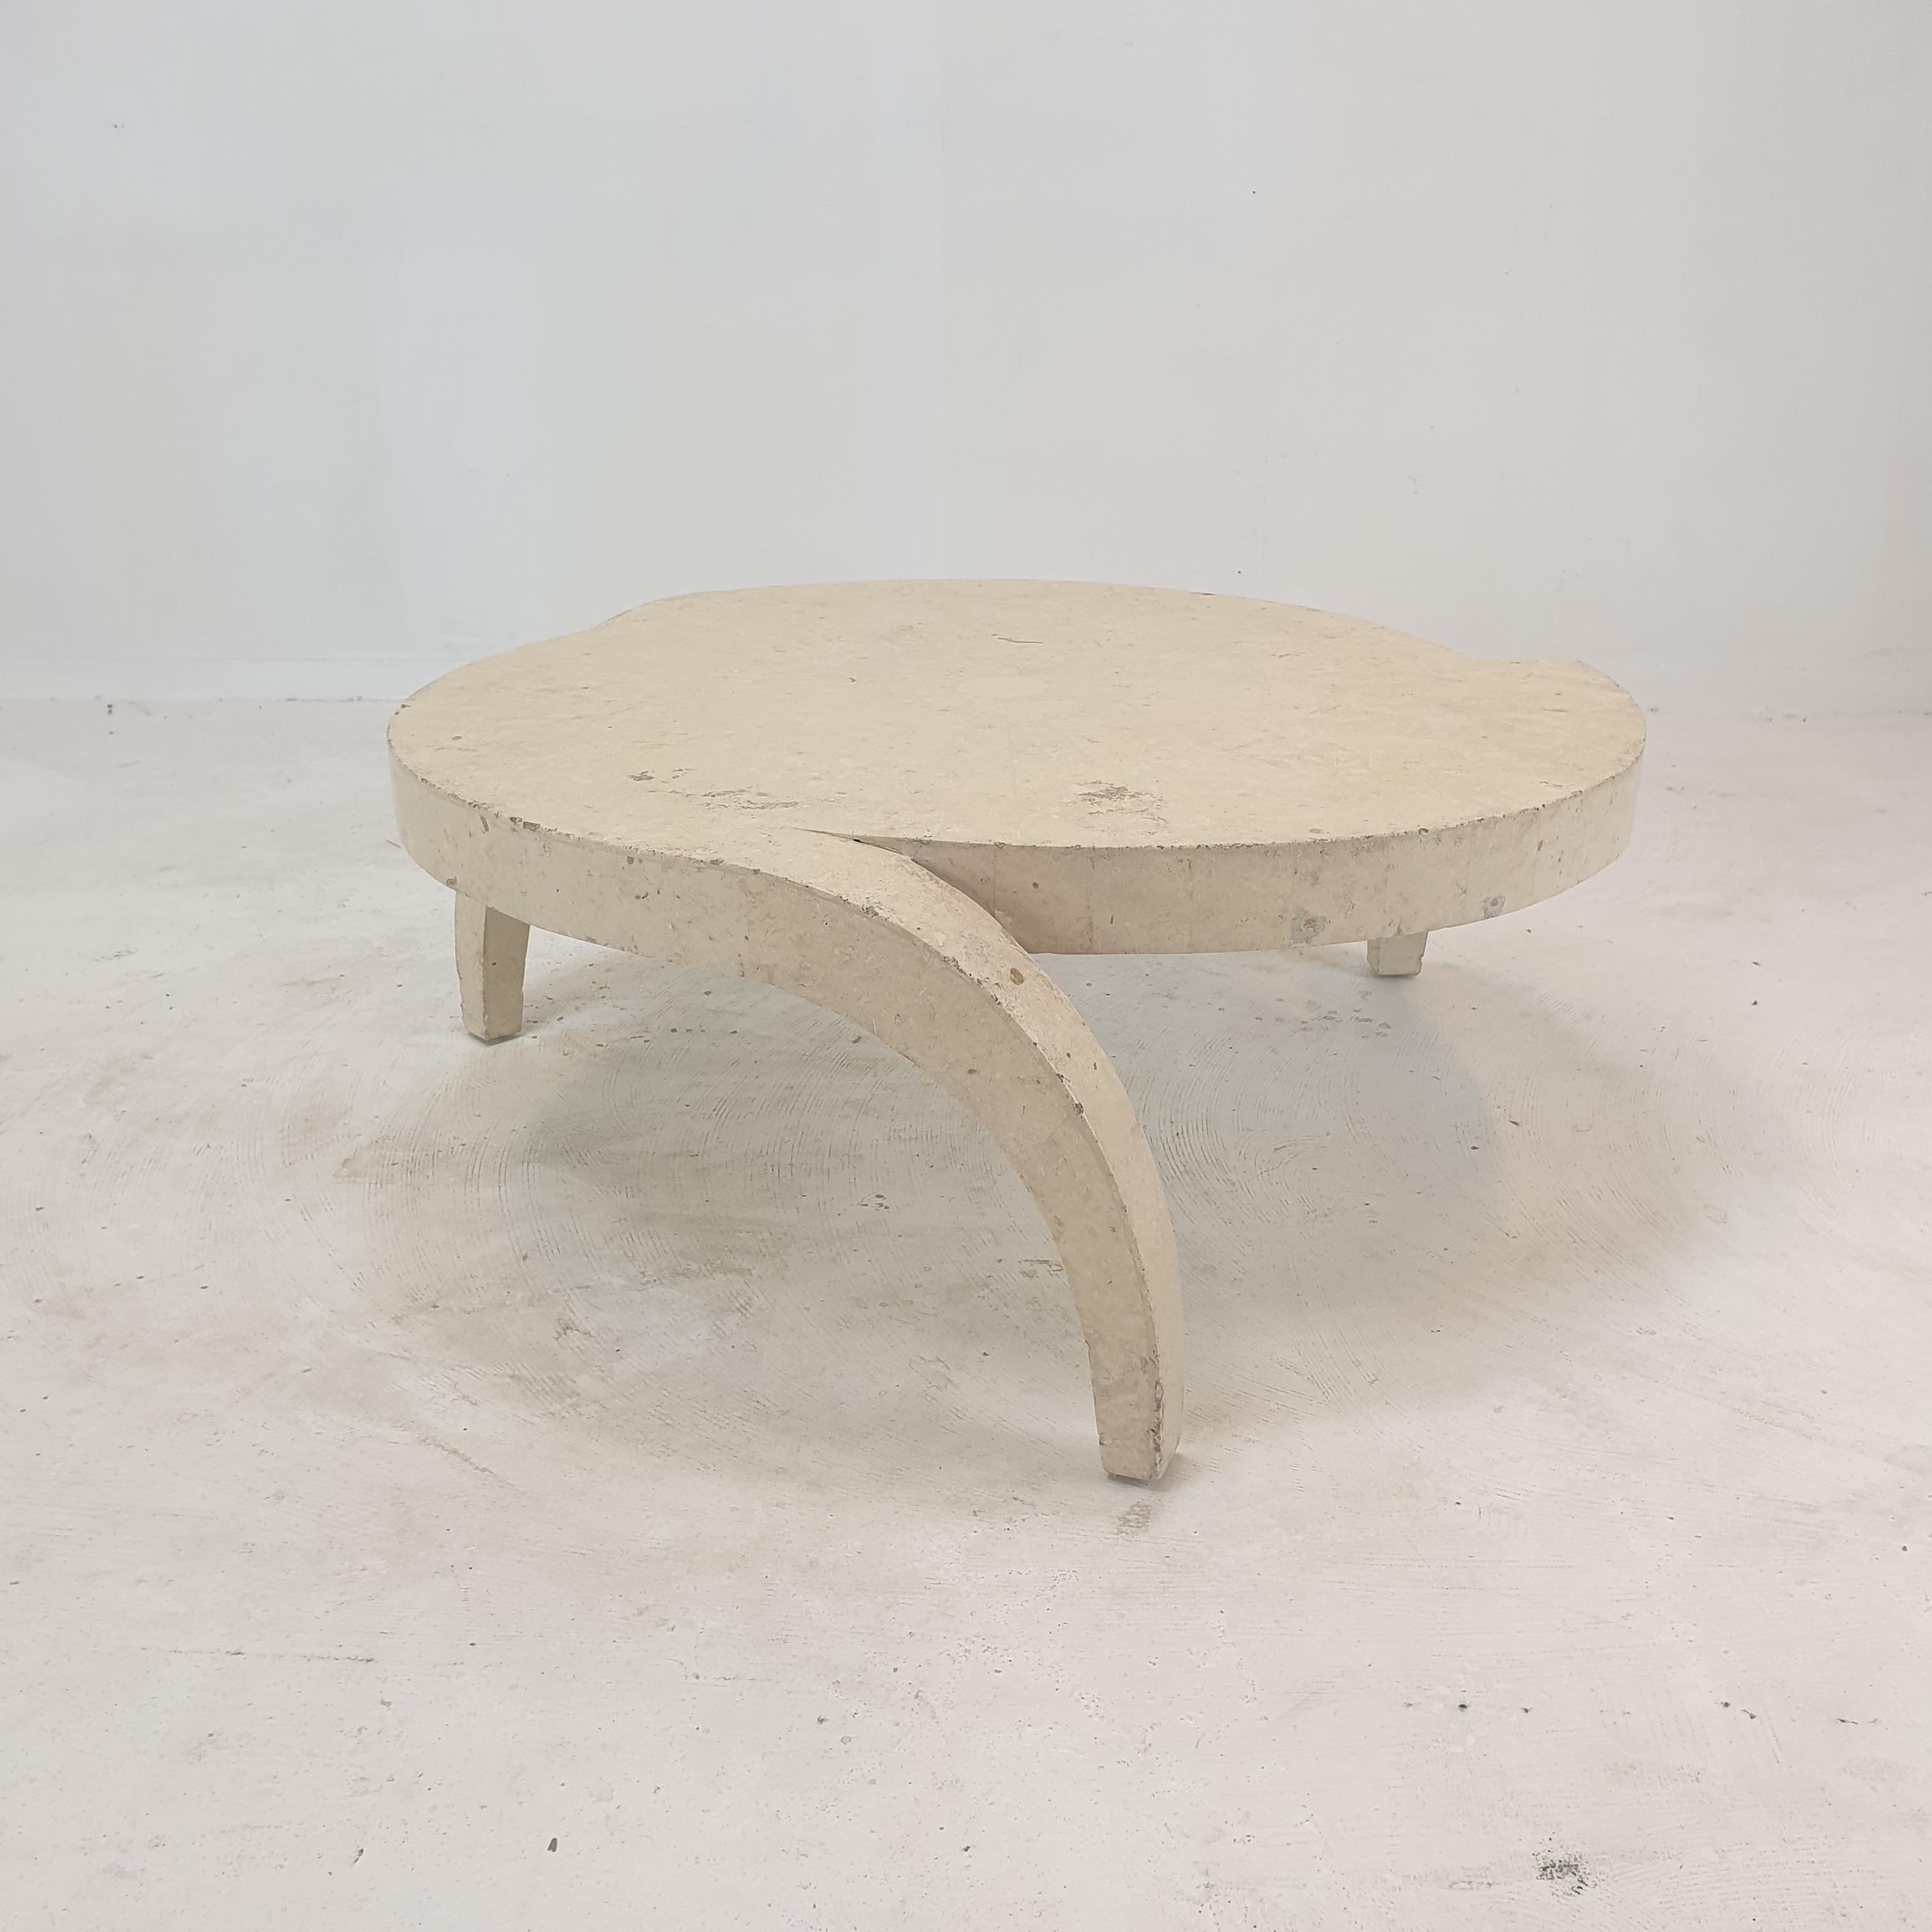 Very nice and rare coffee or side table, 1980s.

This stunning table is made of rough edged brick motif Mactan stone or Fossil stone.
The weight is around 15 kg (55 lbs).

We work with professional packers and shippers, we can deliver worldwide